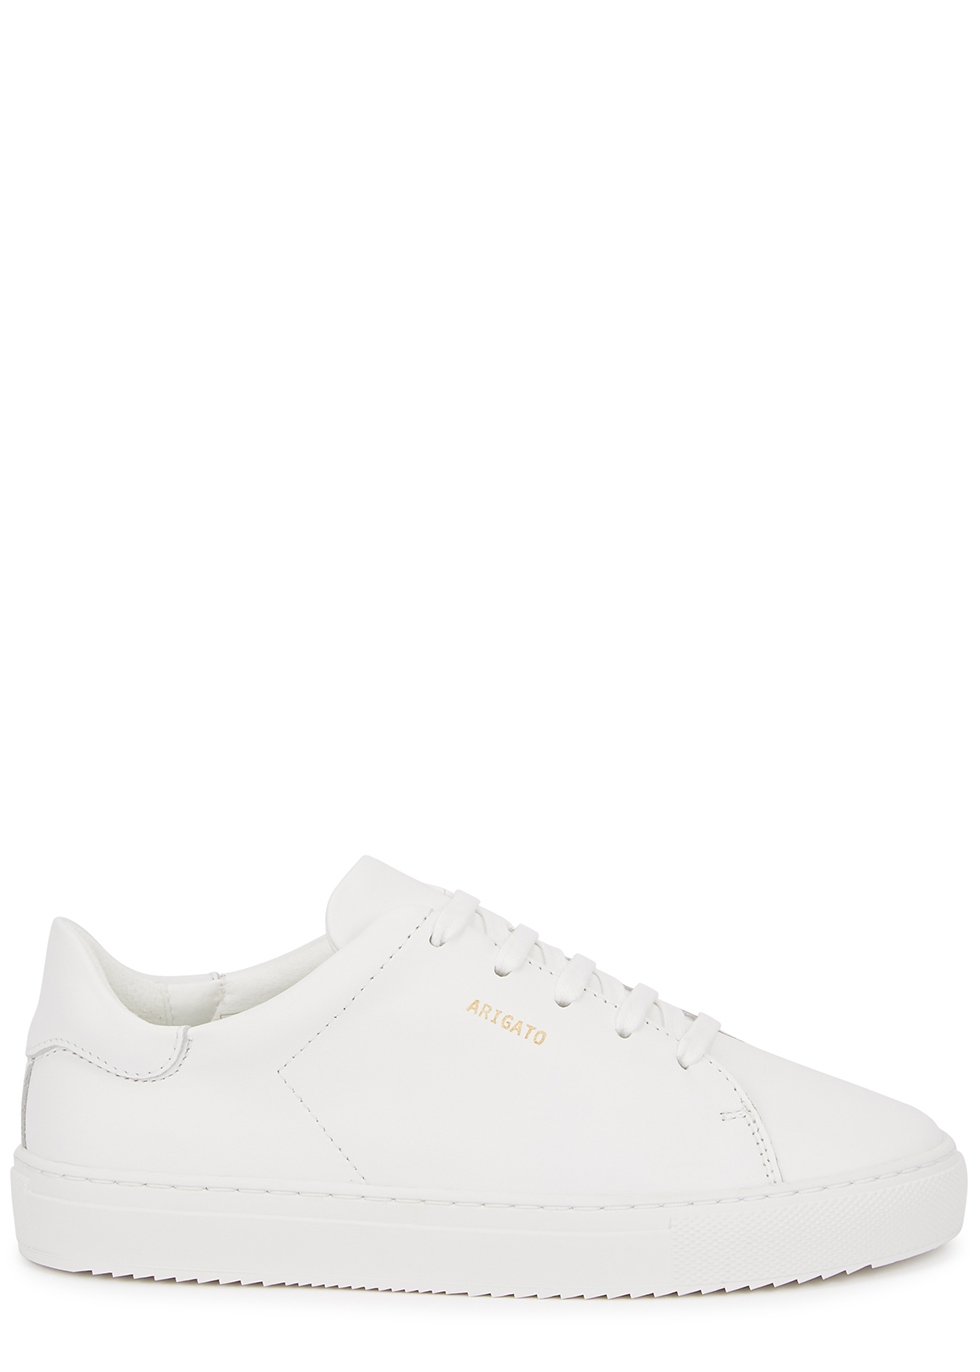 KIDS Clean 90 white leather sneakers